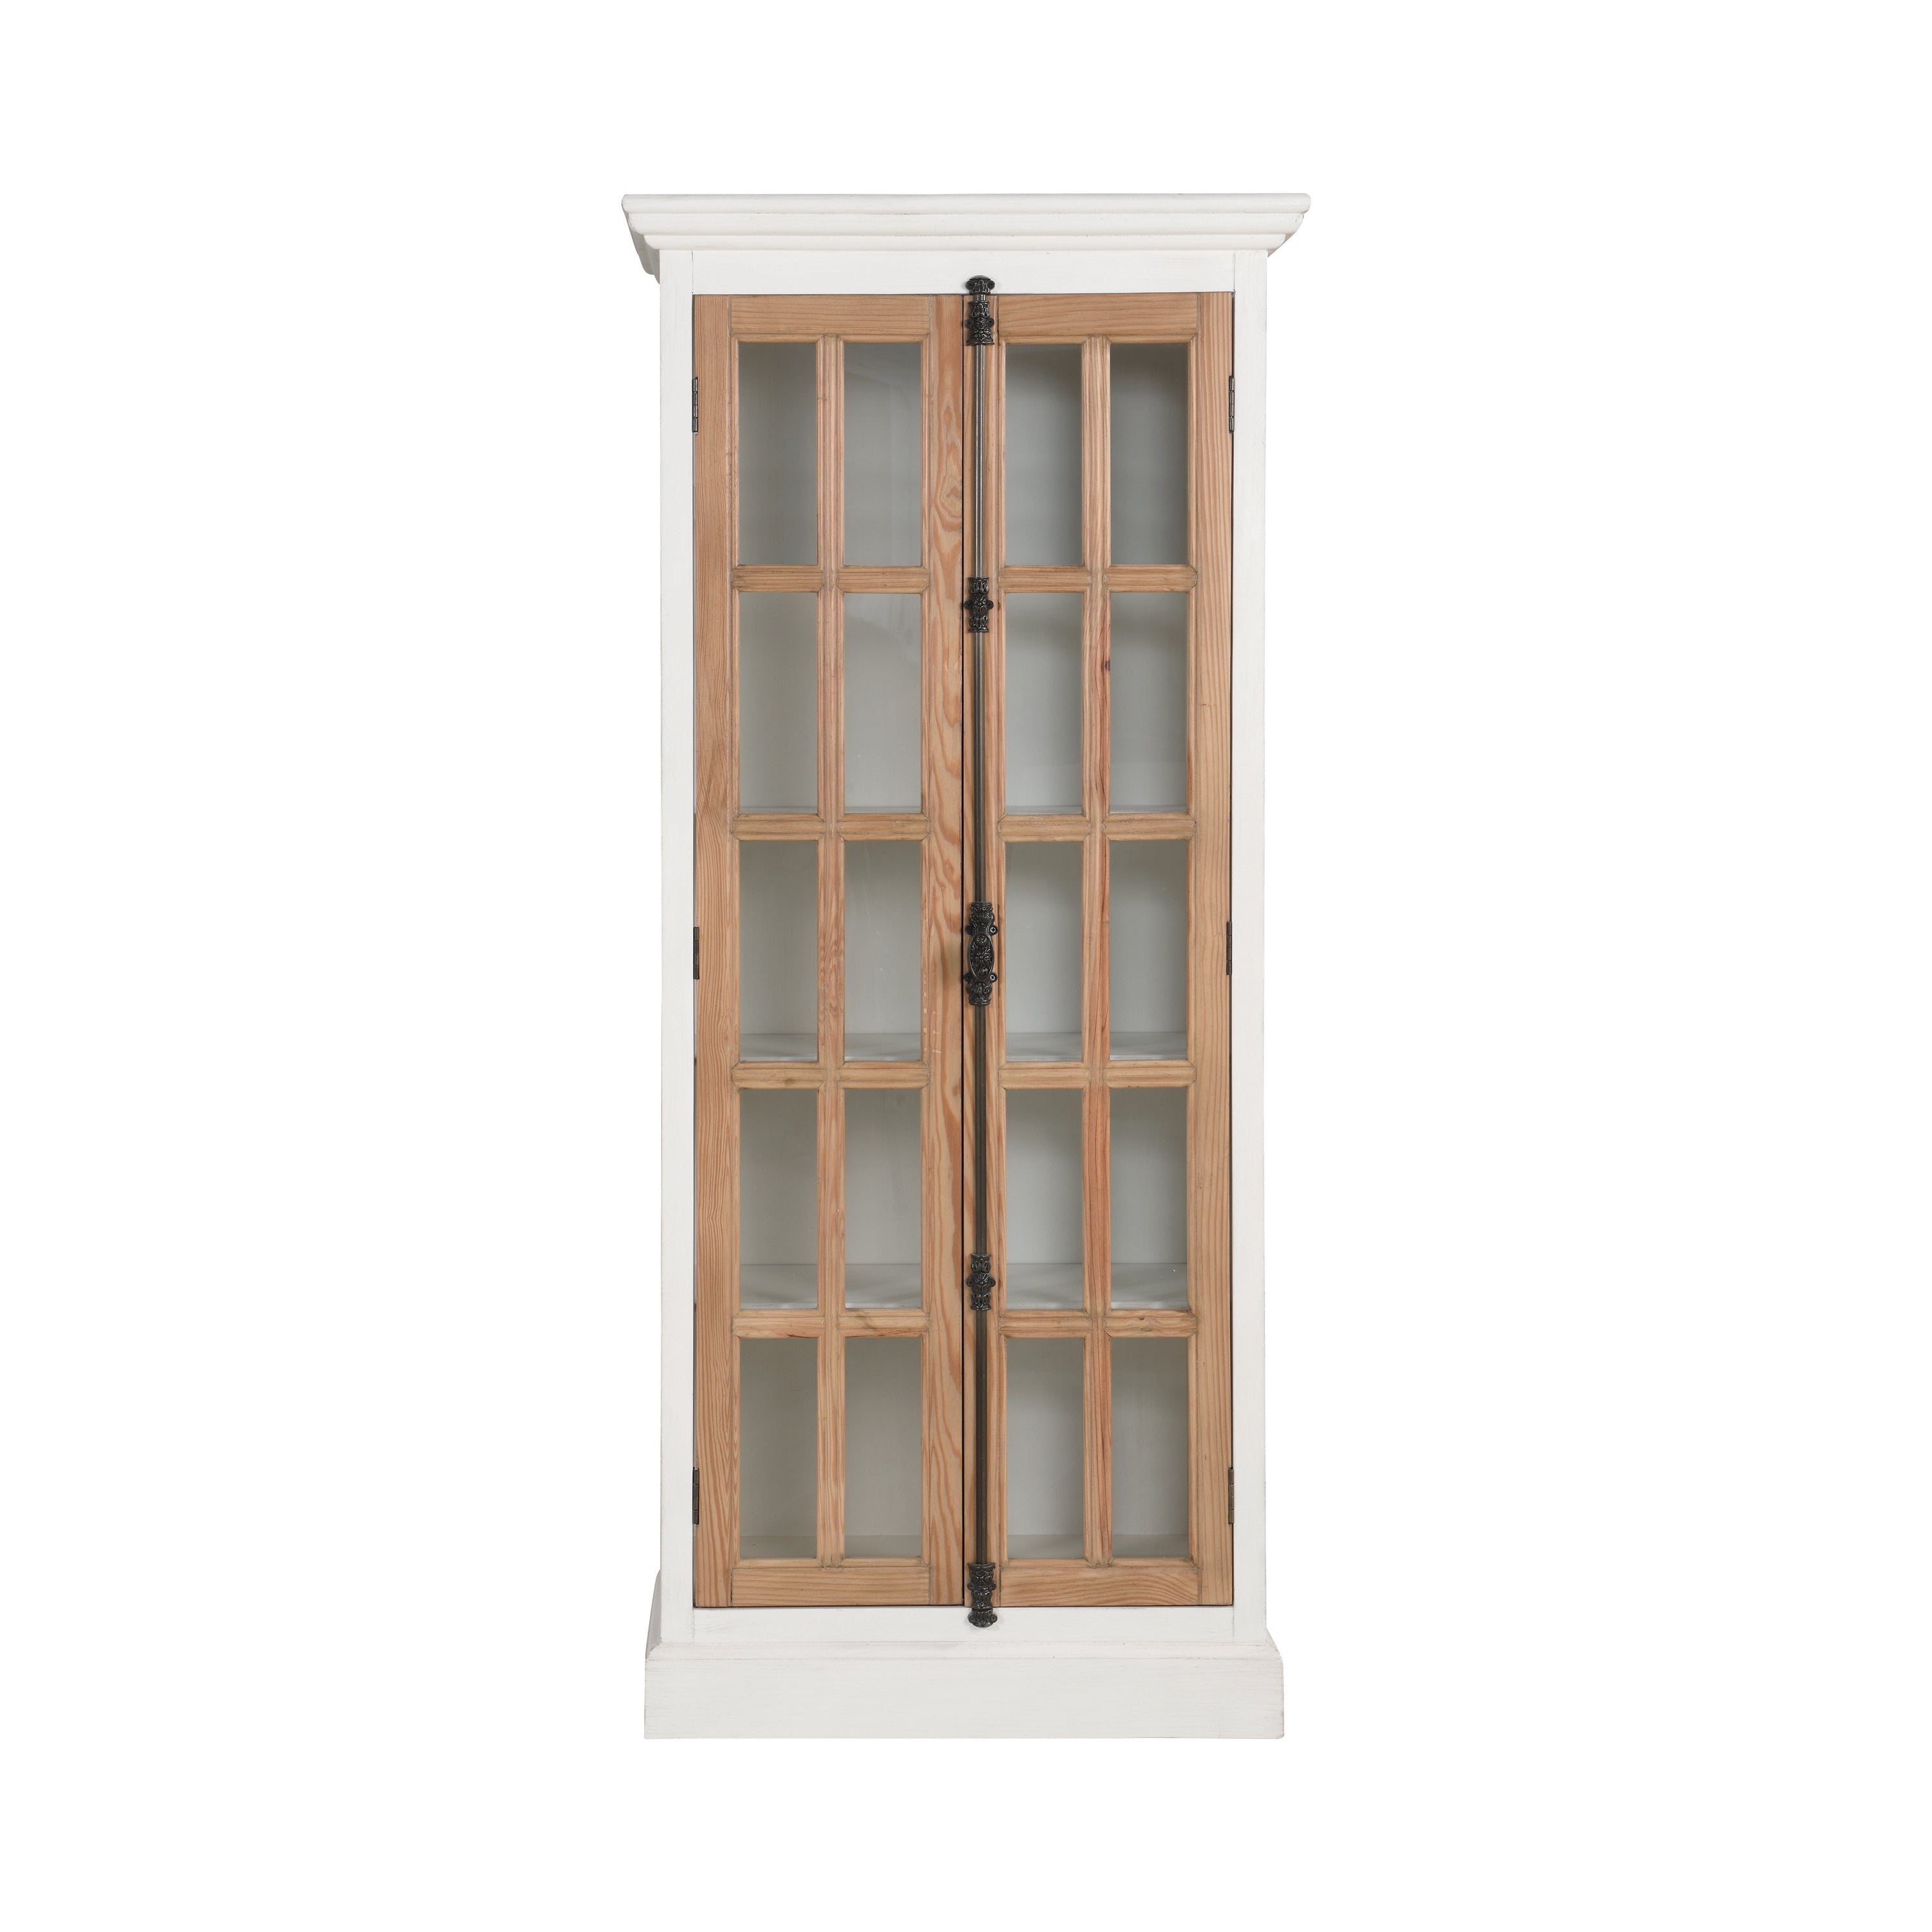 Antique White Natural Wood Display Cabinet Sellwood Furniture